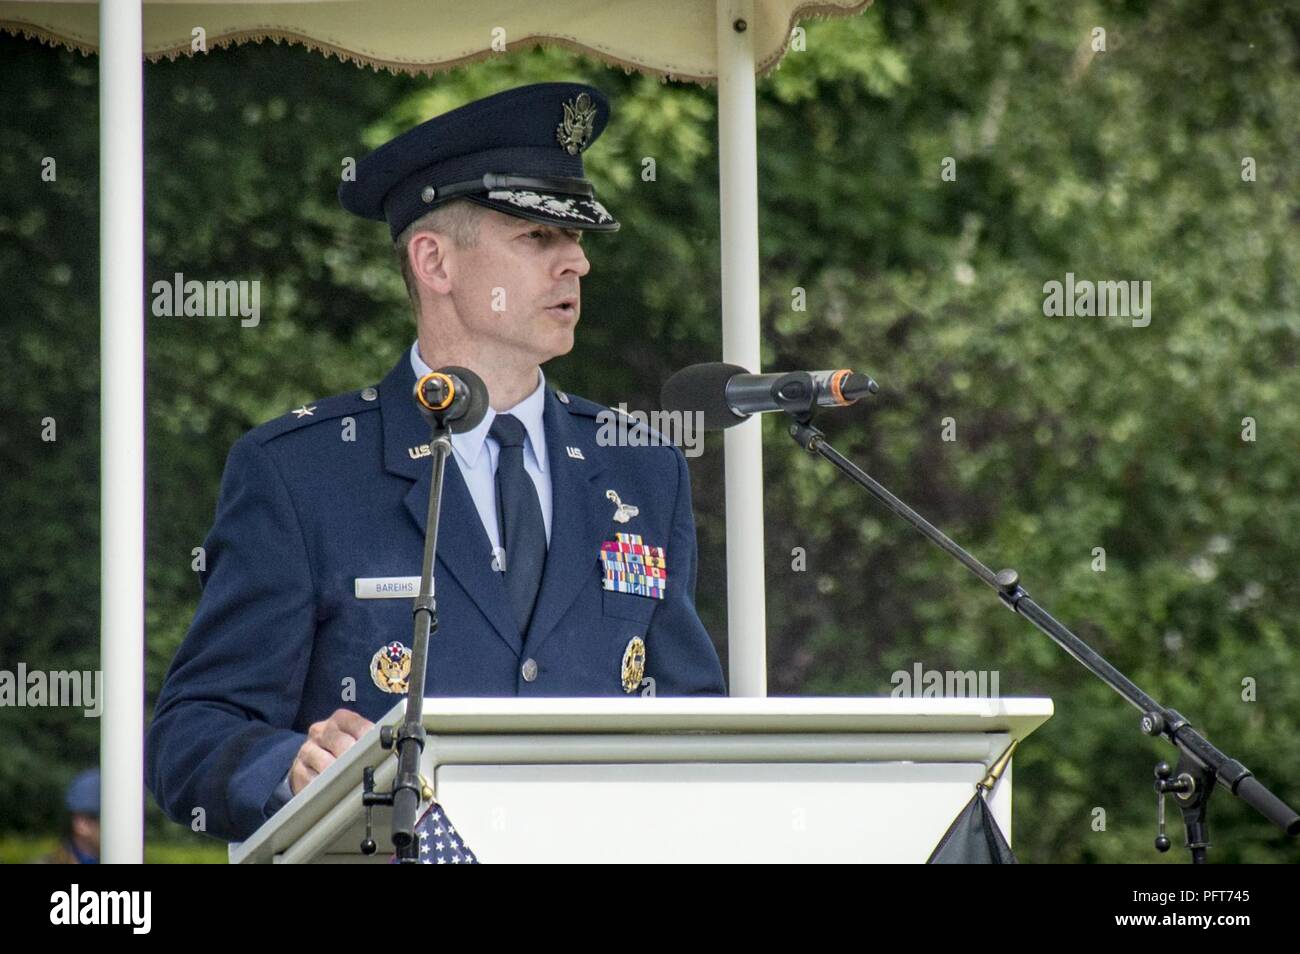 Waregem, Belgium – U.S. Air Force Brig. Gen. Dieter Bareihs, Director of Plans, Programs and Analysis for Headquarters U.S. Air Forces in Europe and Air Forces Africa, pays tribute to the fallen Soldiers of World War I, during a Memorial Day ceremony at Flanders Field American Cemetery on May 27, 2018. This annual ceremony honors the men and women who gave the ultimate sacrifice for the liberation of Europe during WWI Stock Photo